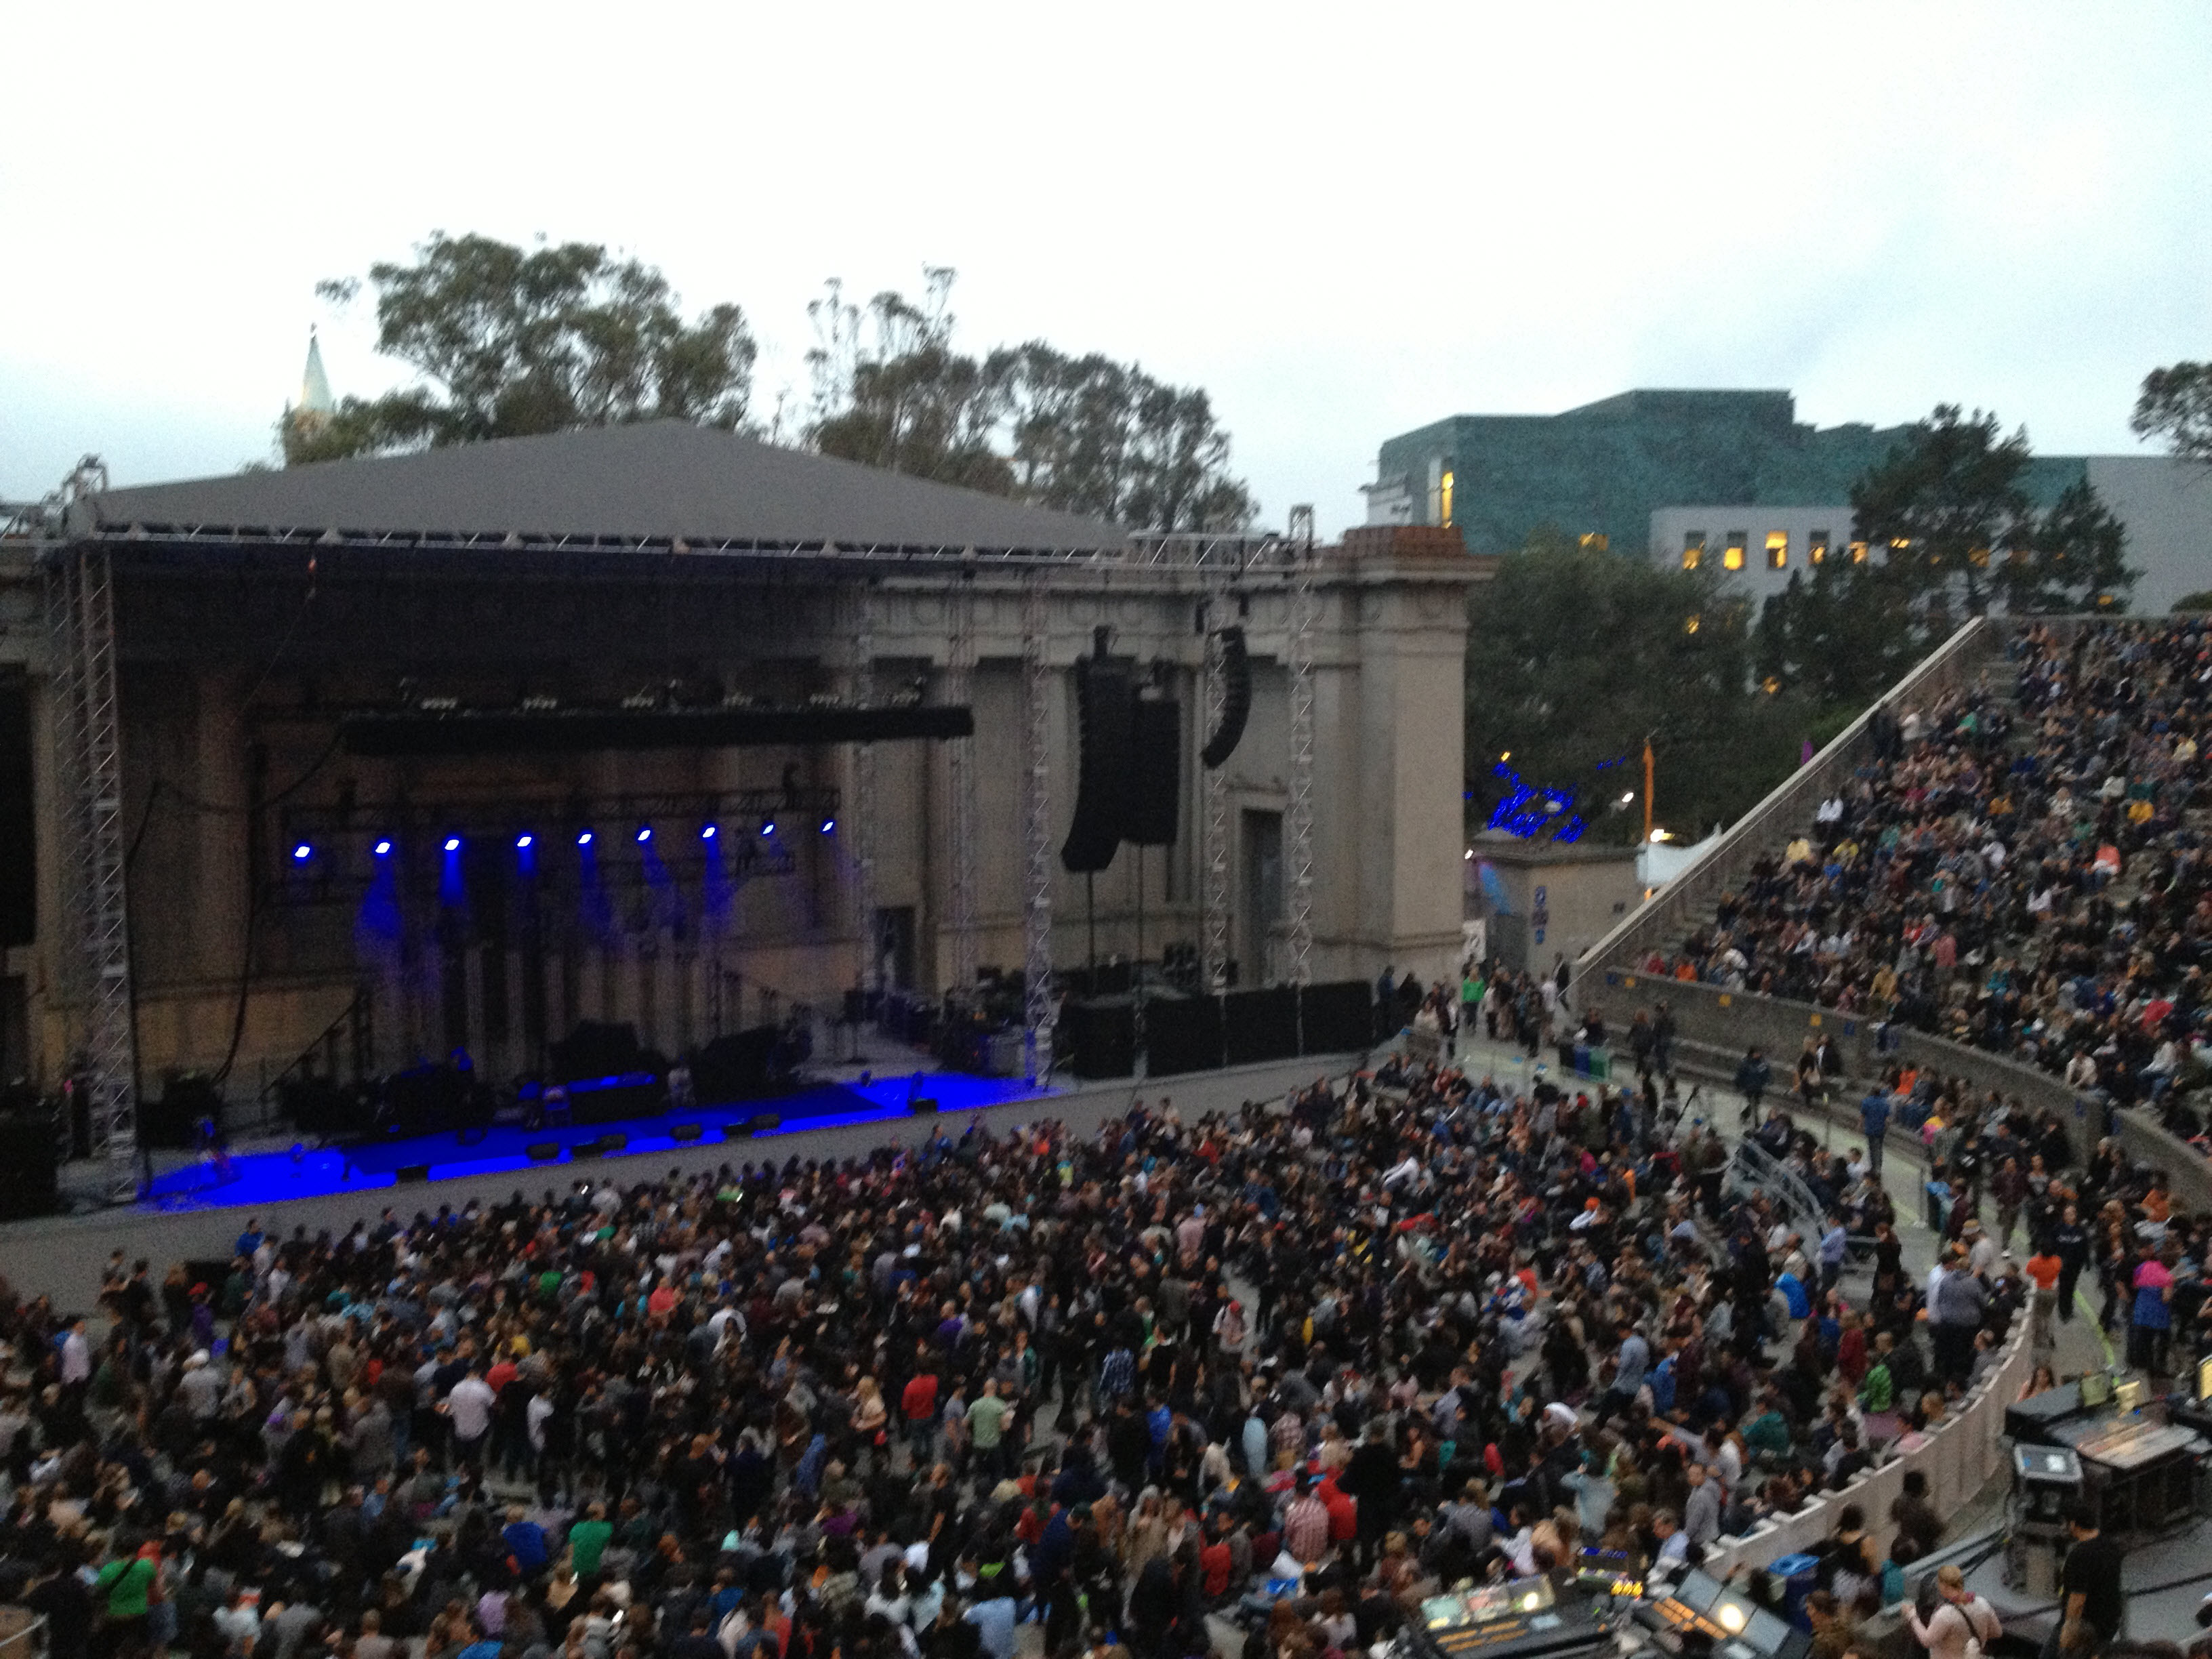 Crowd Sourced: The Postal Service at the Greek Theatre